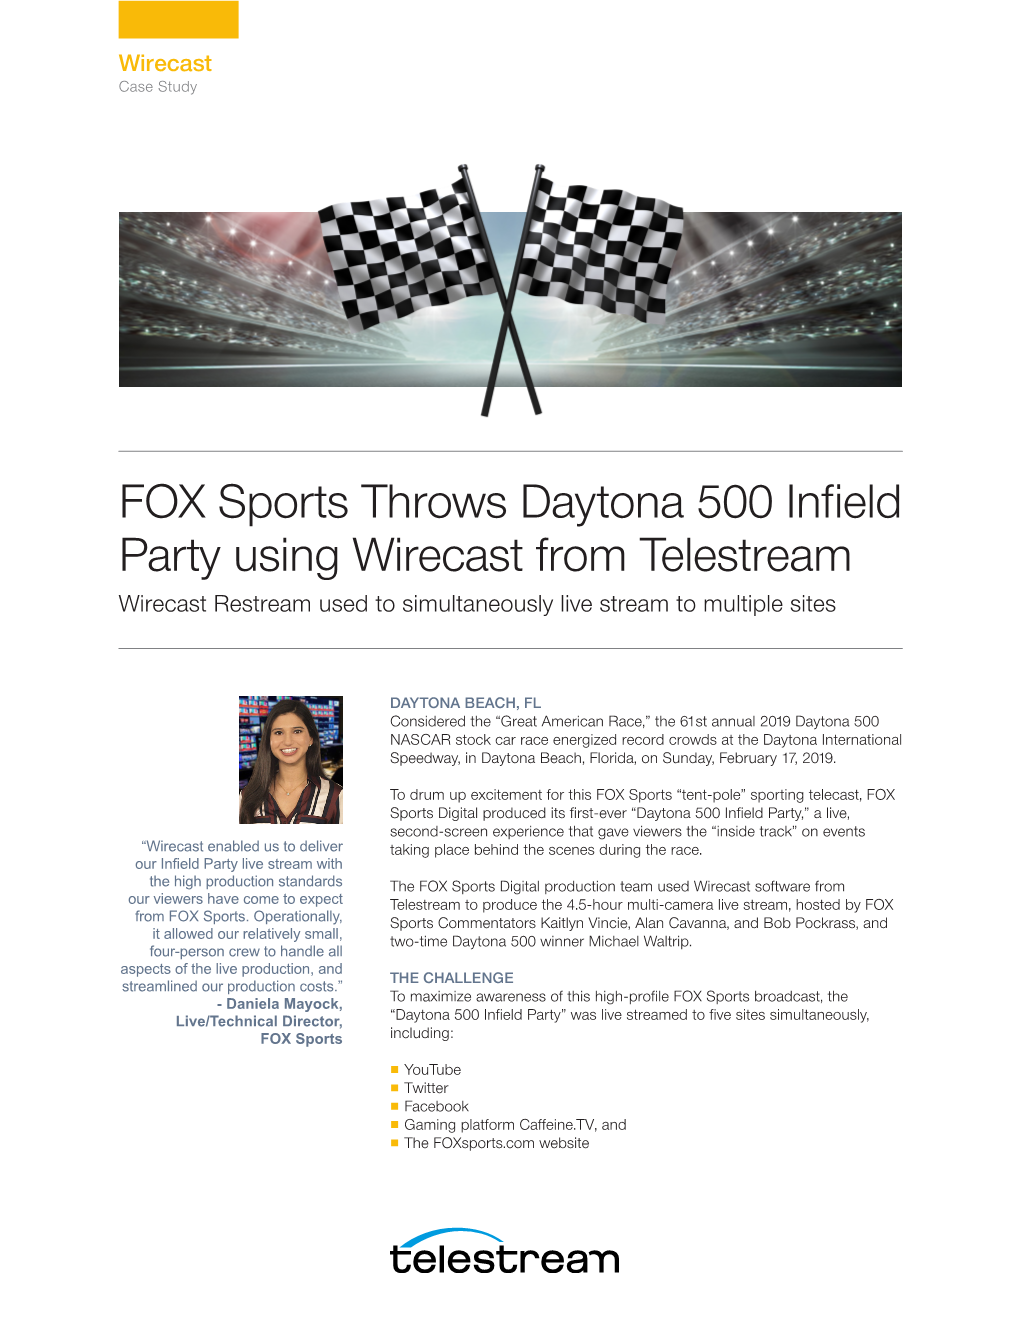 FOX Sports Throws Daytona 500 Infield Party Using Wirecast from Telestream Wirecast Restream Used to Simultaneously Live Stream to Multiple Sites